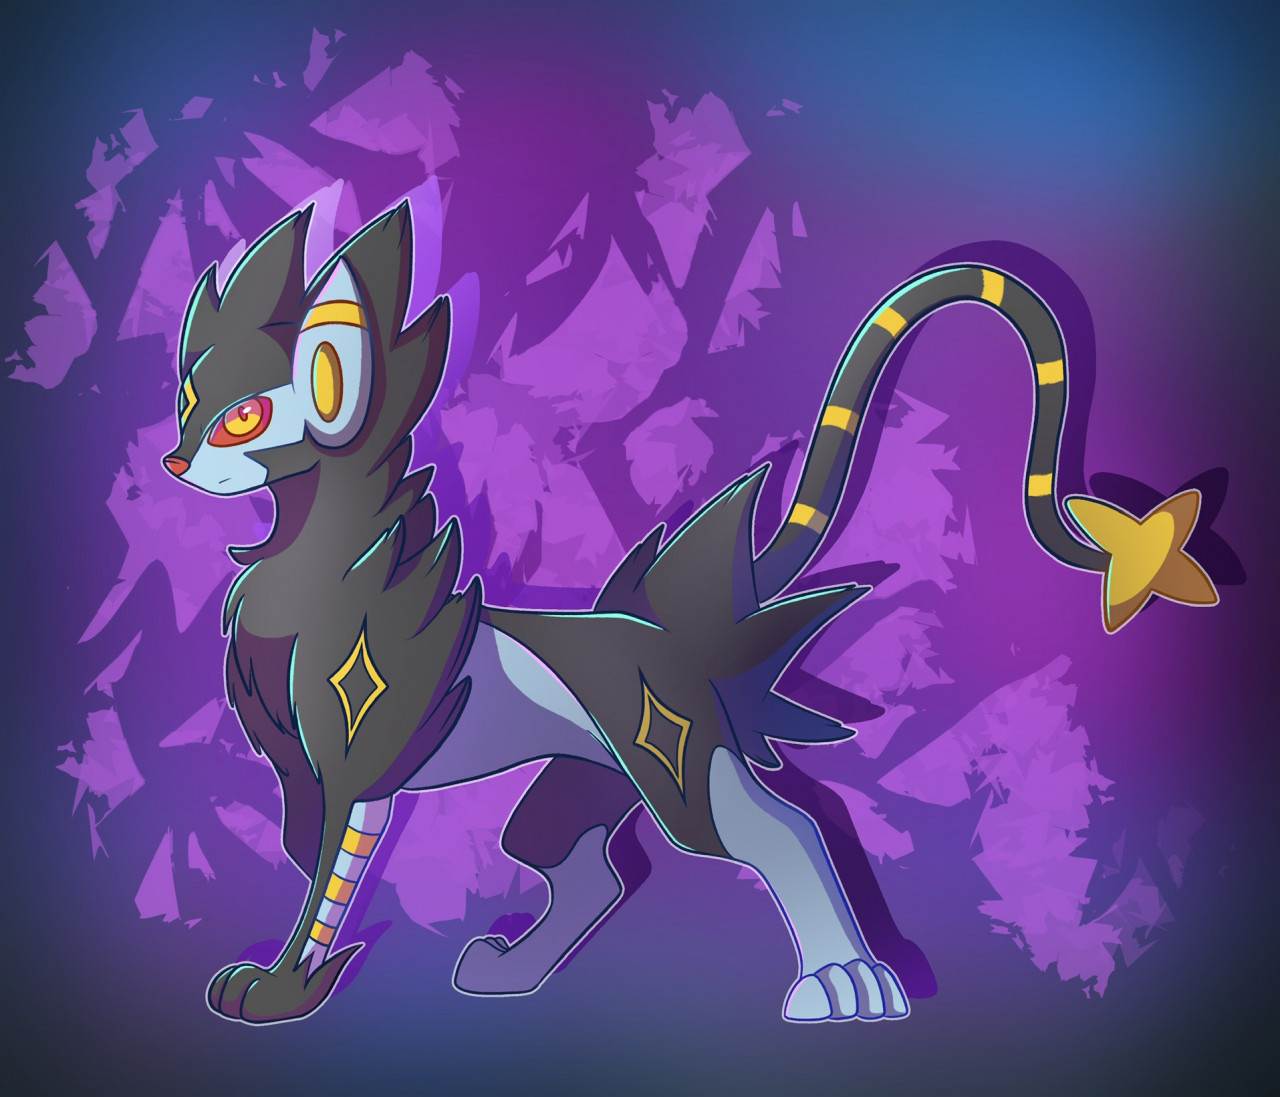 onto the next adventure  Luxray Wallpaper requested by luxr4y 彡